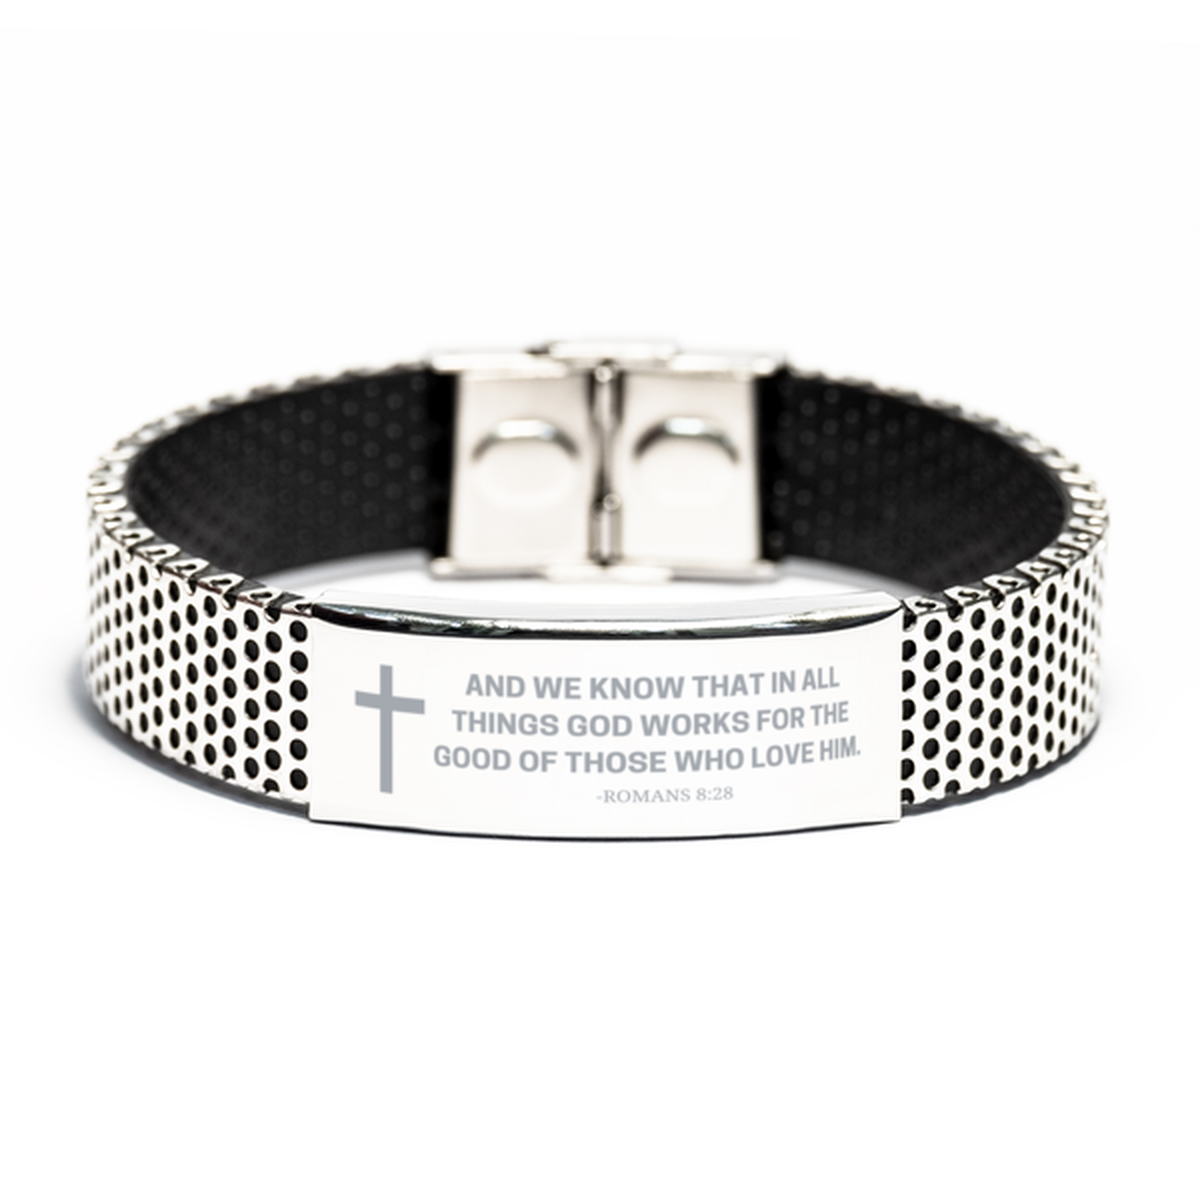 Baptism Gifts For Teenage Boys Girls, Christian Bible Verse Stainless Steel Bracelet, And we know that in all things, Catholic Confirmation Gifts for Son, Godson, Grandson, Nephew